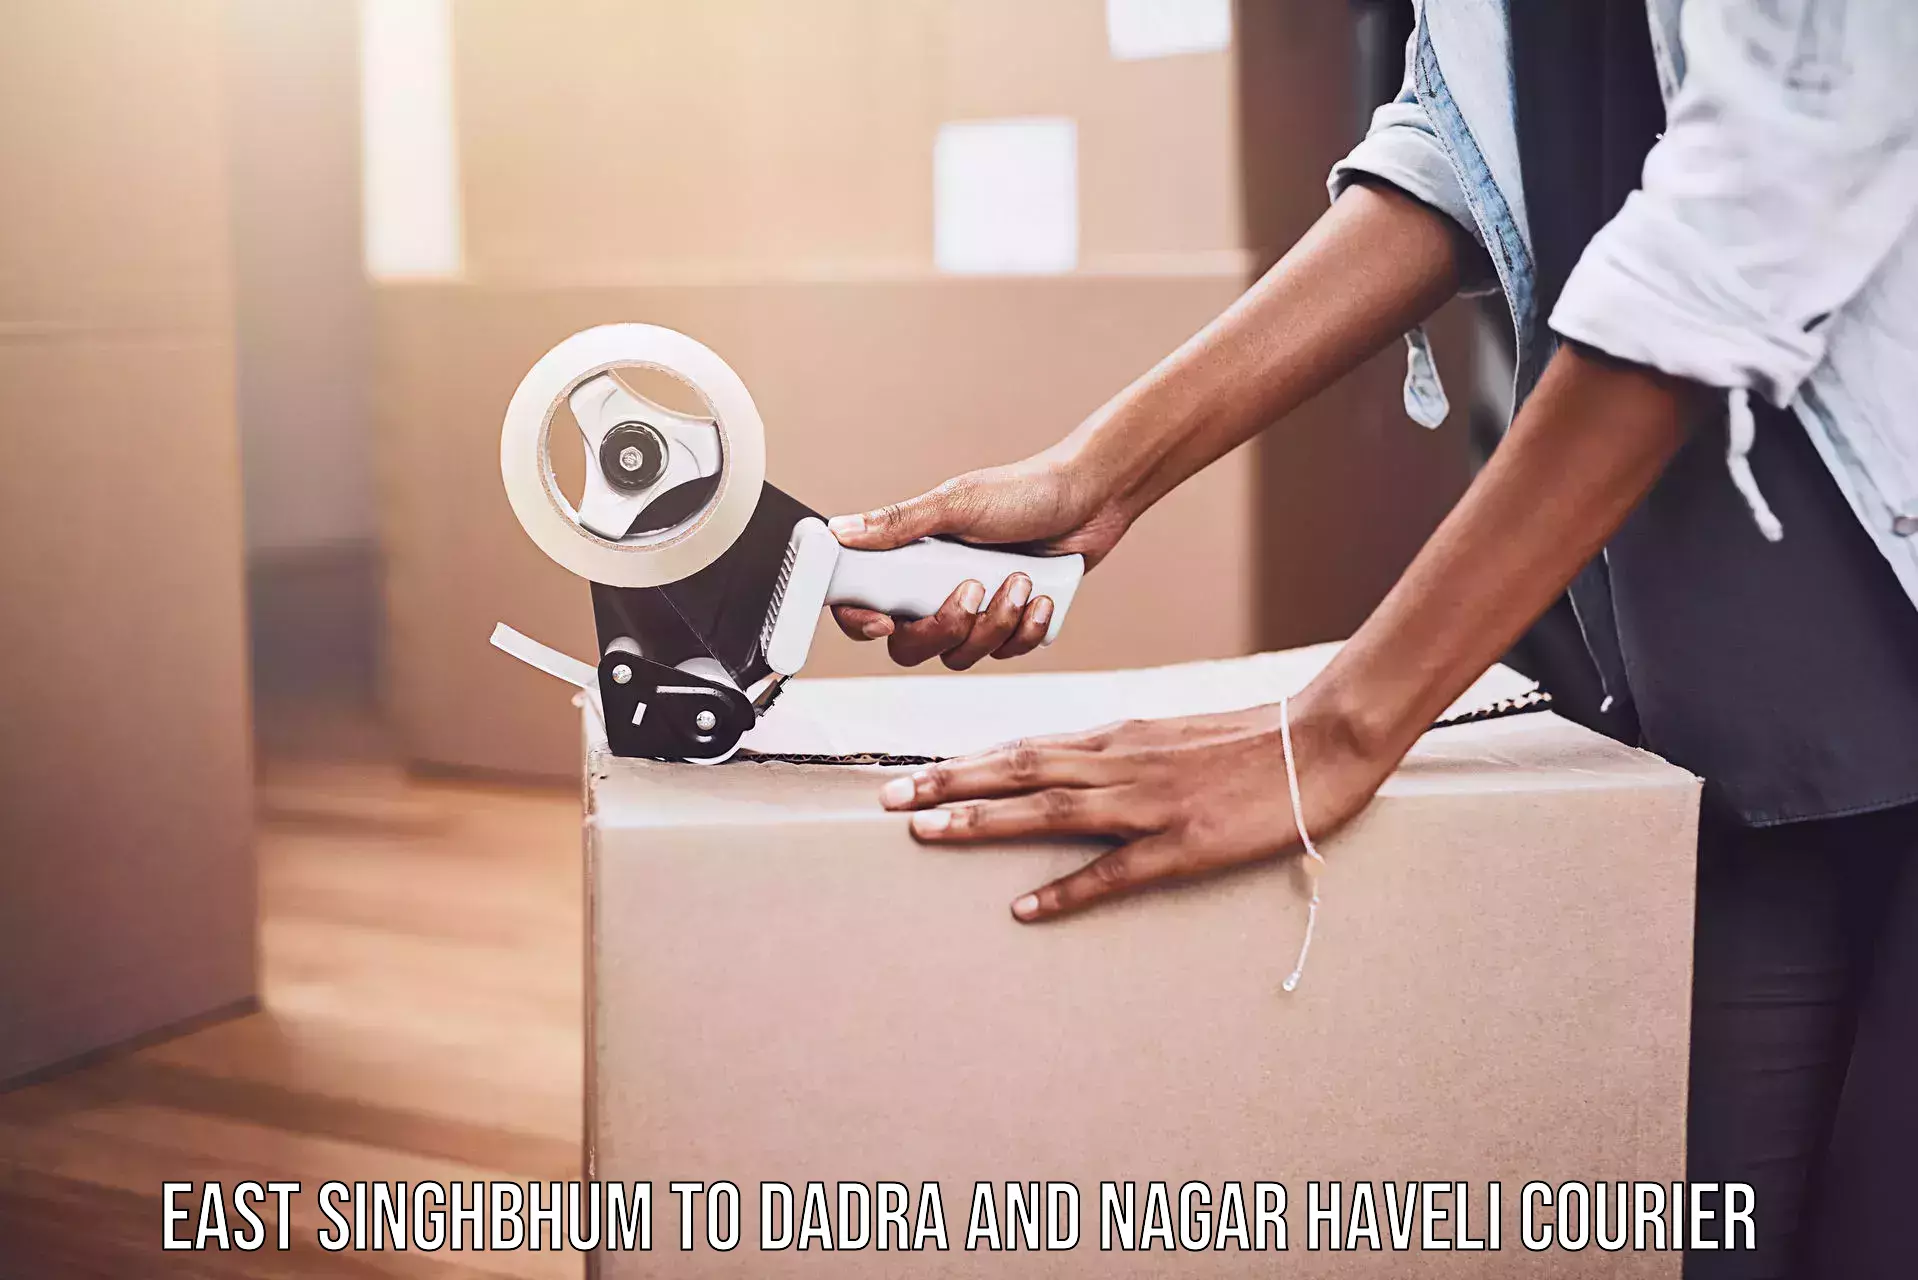 State-of-the-art courier technology East Singhbhum to Dadra and Nagar Haveli